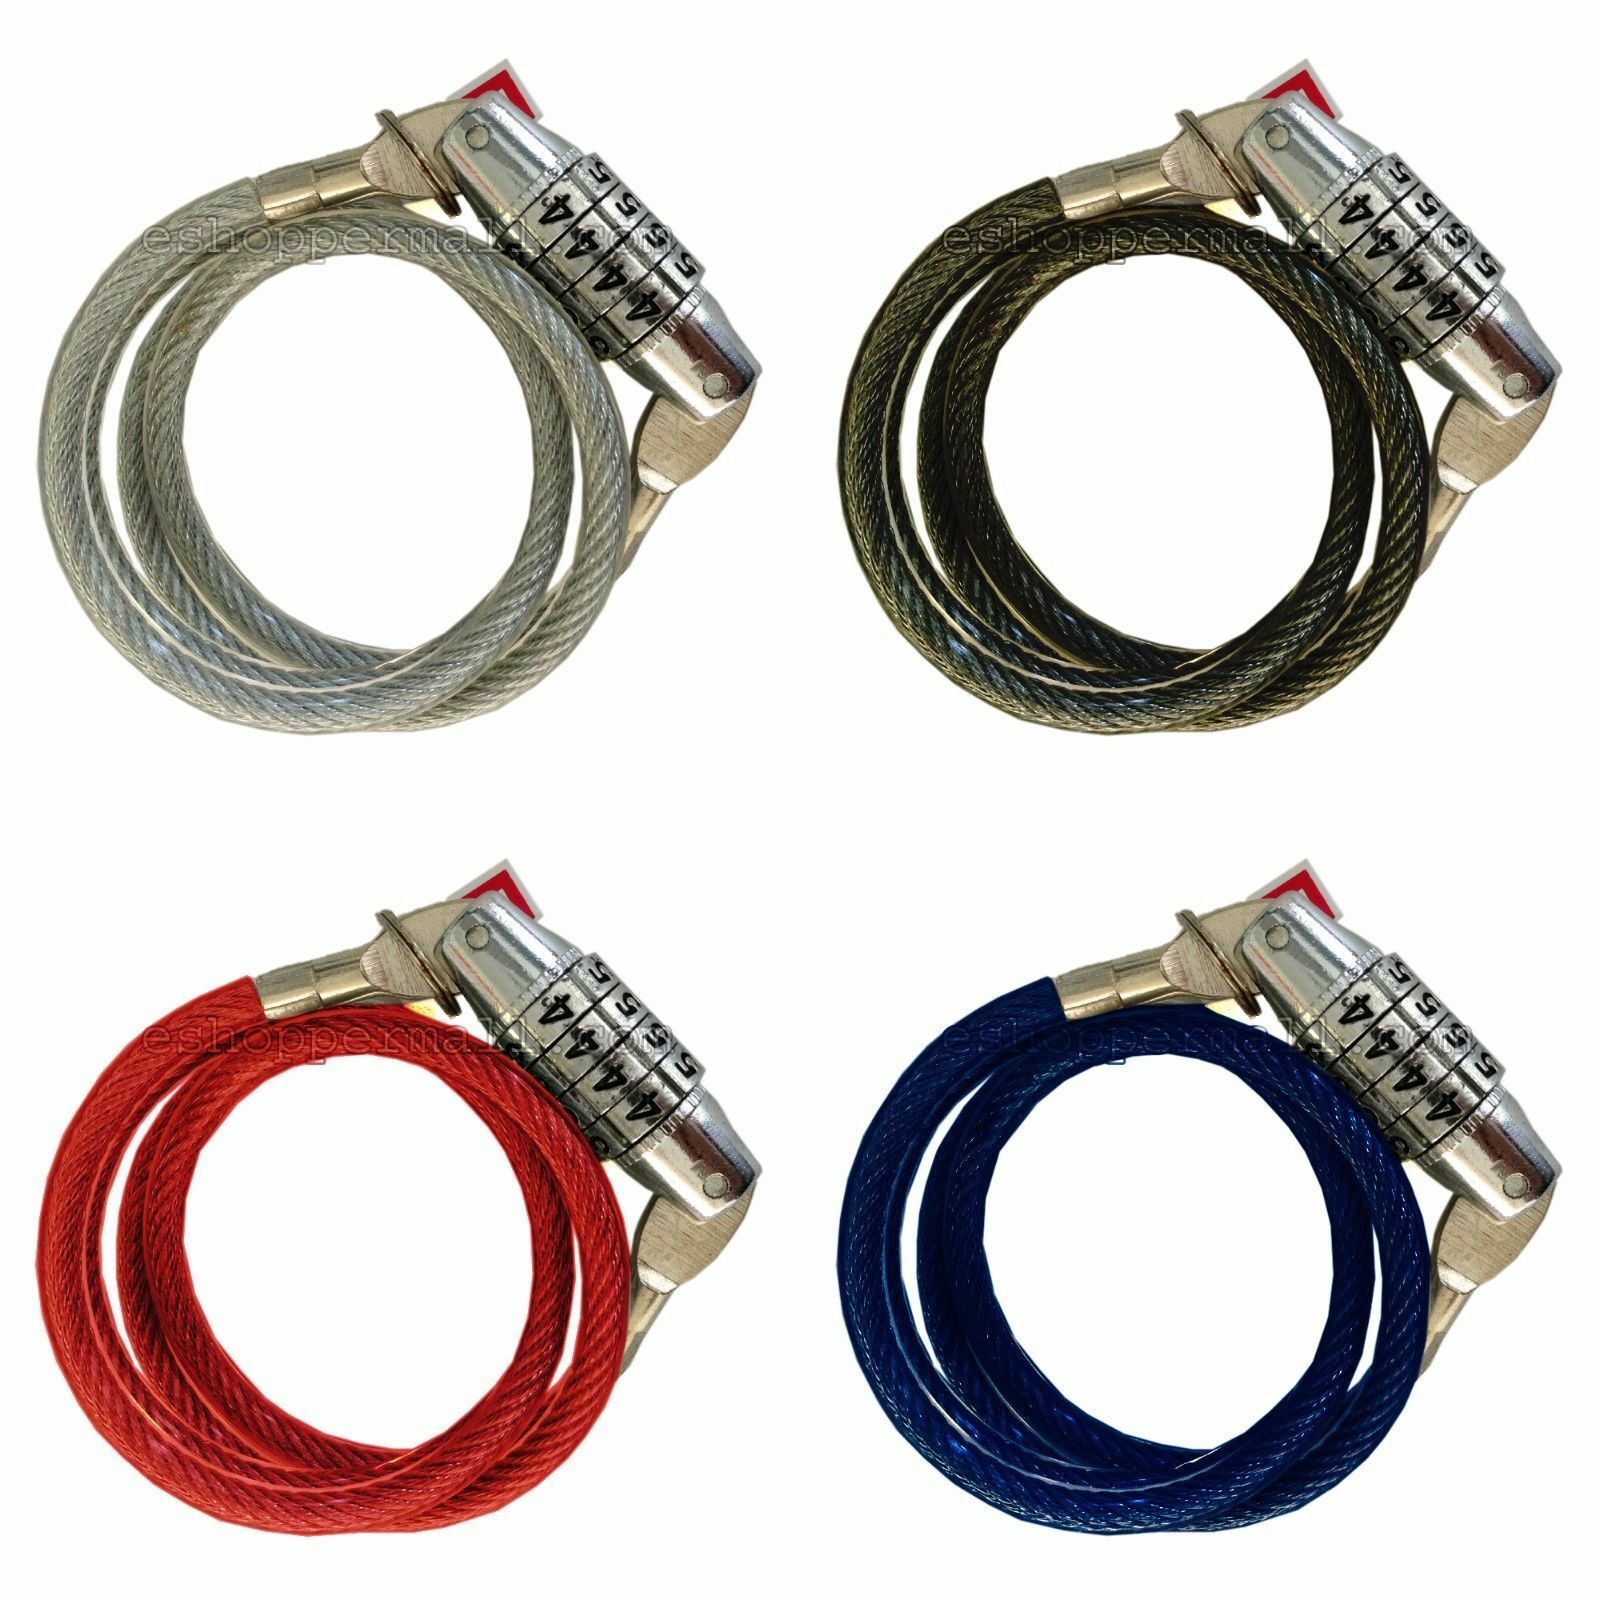 4-digit Bicycle Bike Combination Cable Lock Anti-theft Security 24" Long 4 Color